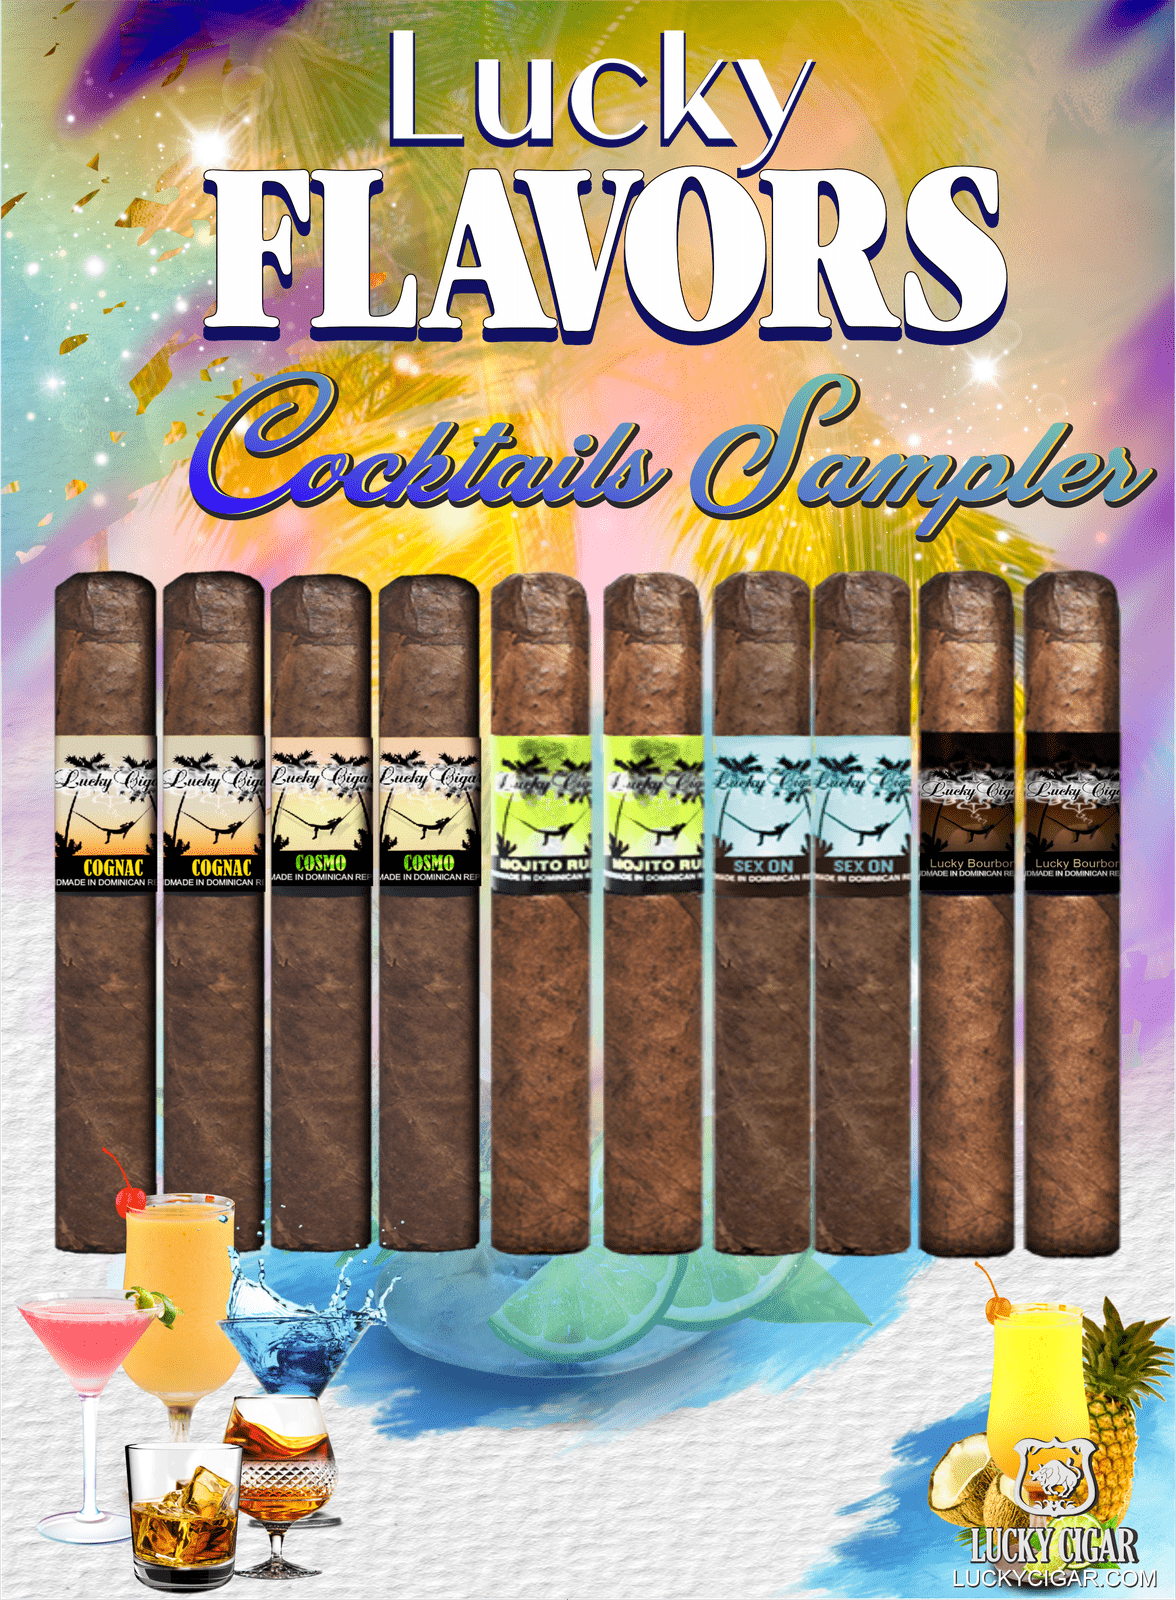 Flavored Cigars: Lucky Flavors 10 Piece Cocktails Sampler